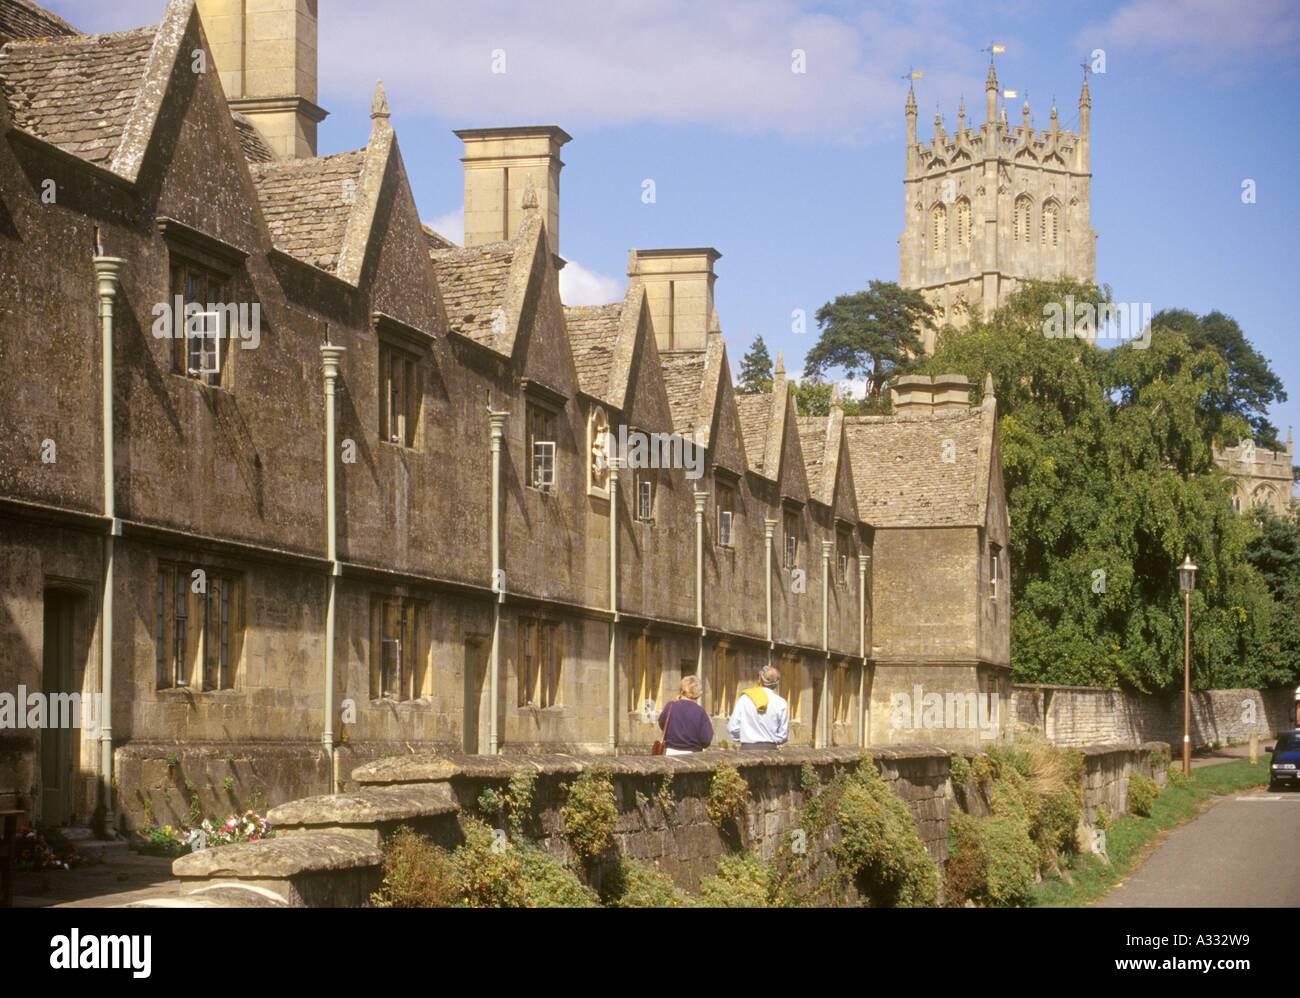 Sir Baptist Hicks Almshouses (1612) in the ancient Cotswold town of Chipping Campden, Gloucestershire Stock Photo